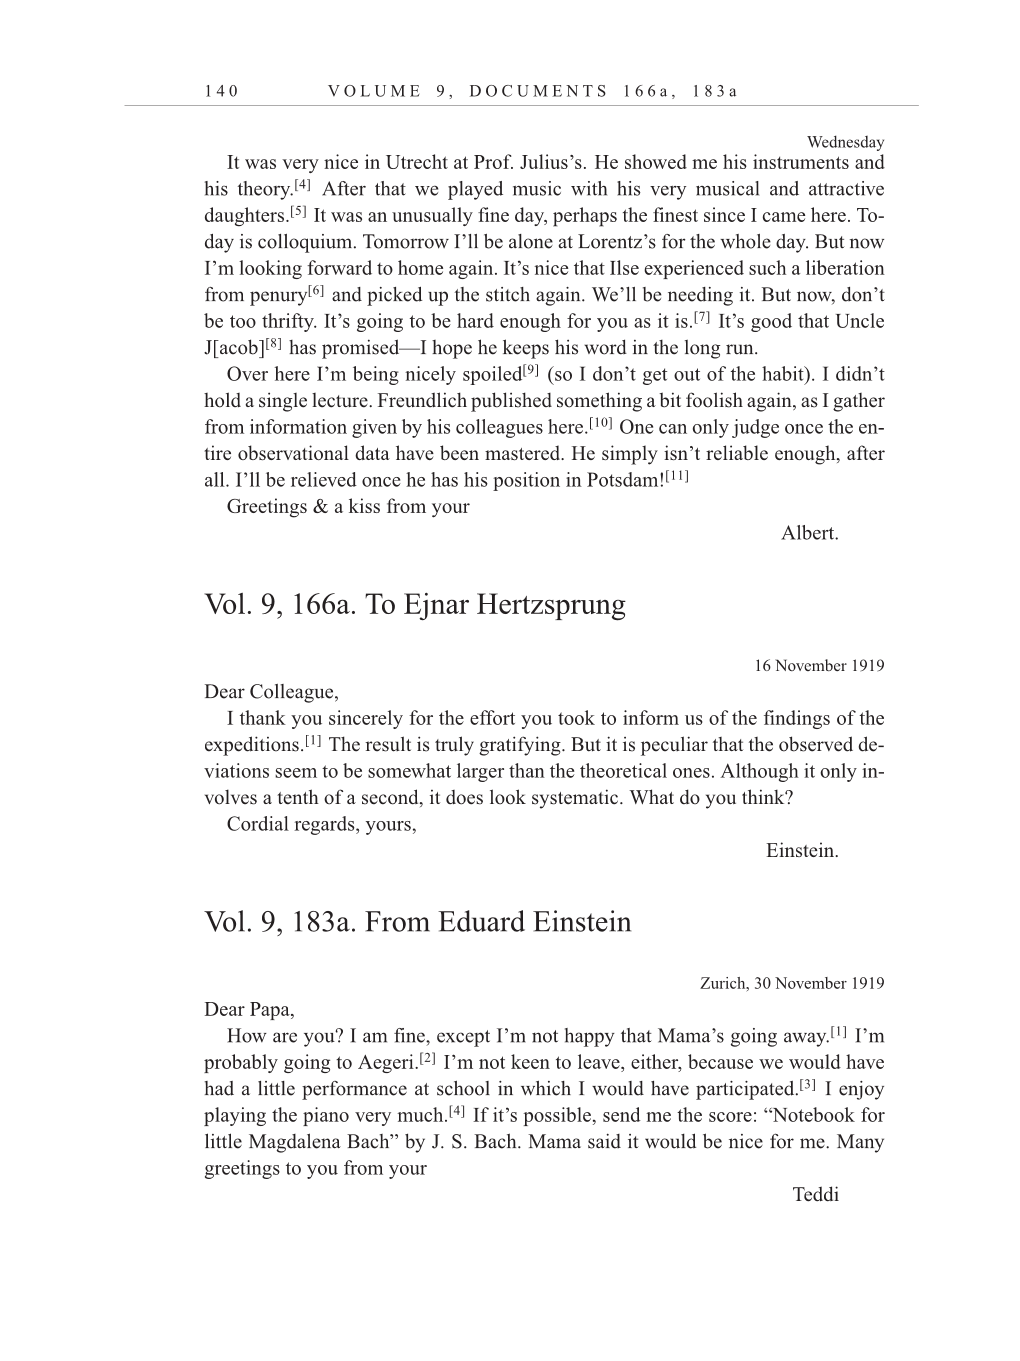 Volume 10: The Berlin Years: Correspondence, May-December 1920, and Supplementary Correspondence, 1909-1920 (English translation supplement) page 140